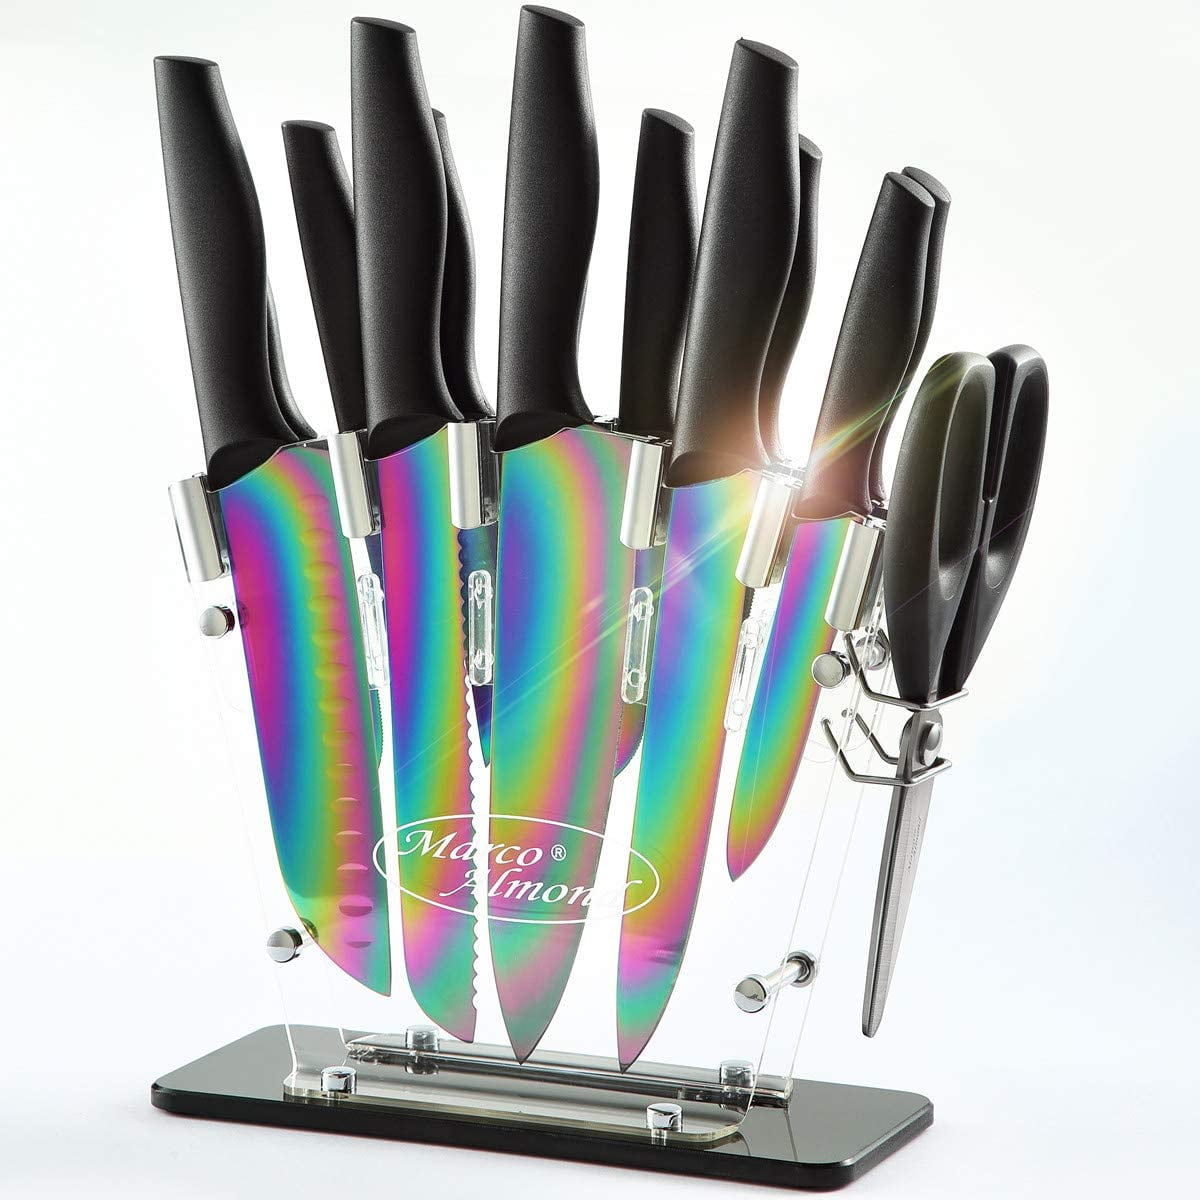 Aiheal Knife Set, 16 Pieces High Carbon Stainless Steel Rainbow Color Kitchen Knife Set, Titanium Coating Blade, No Rust and Super Sharp Cutlery